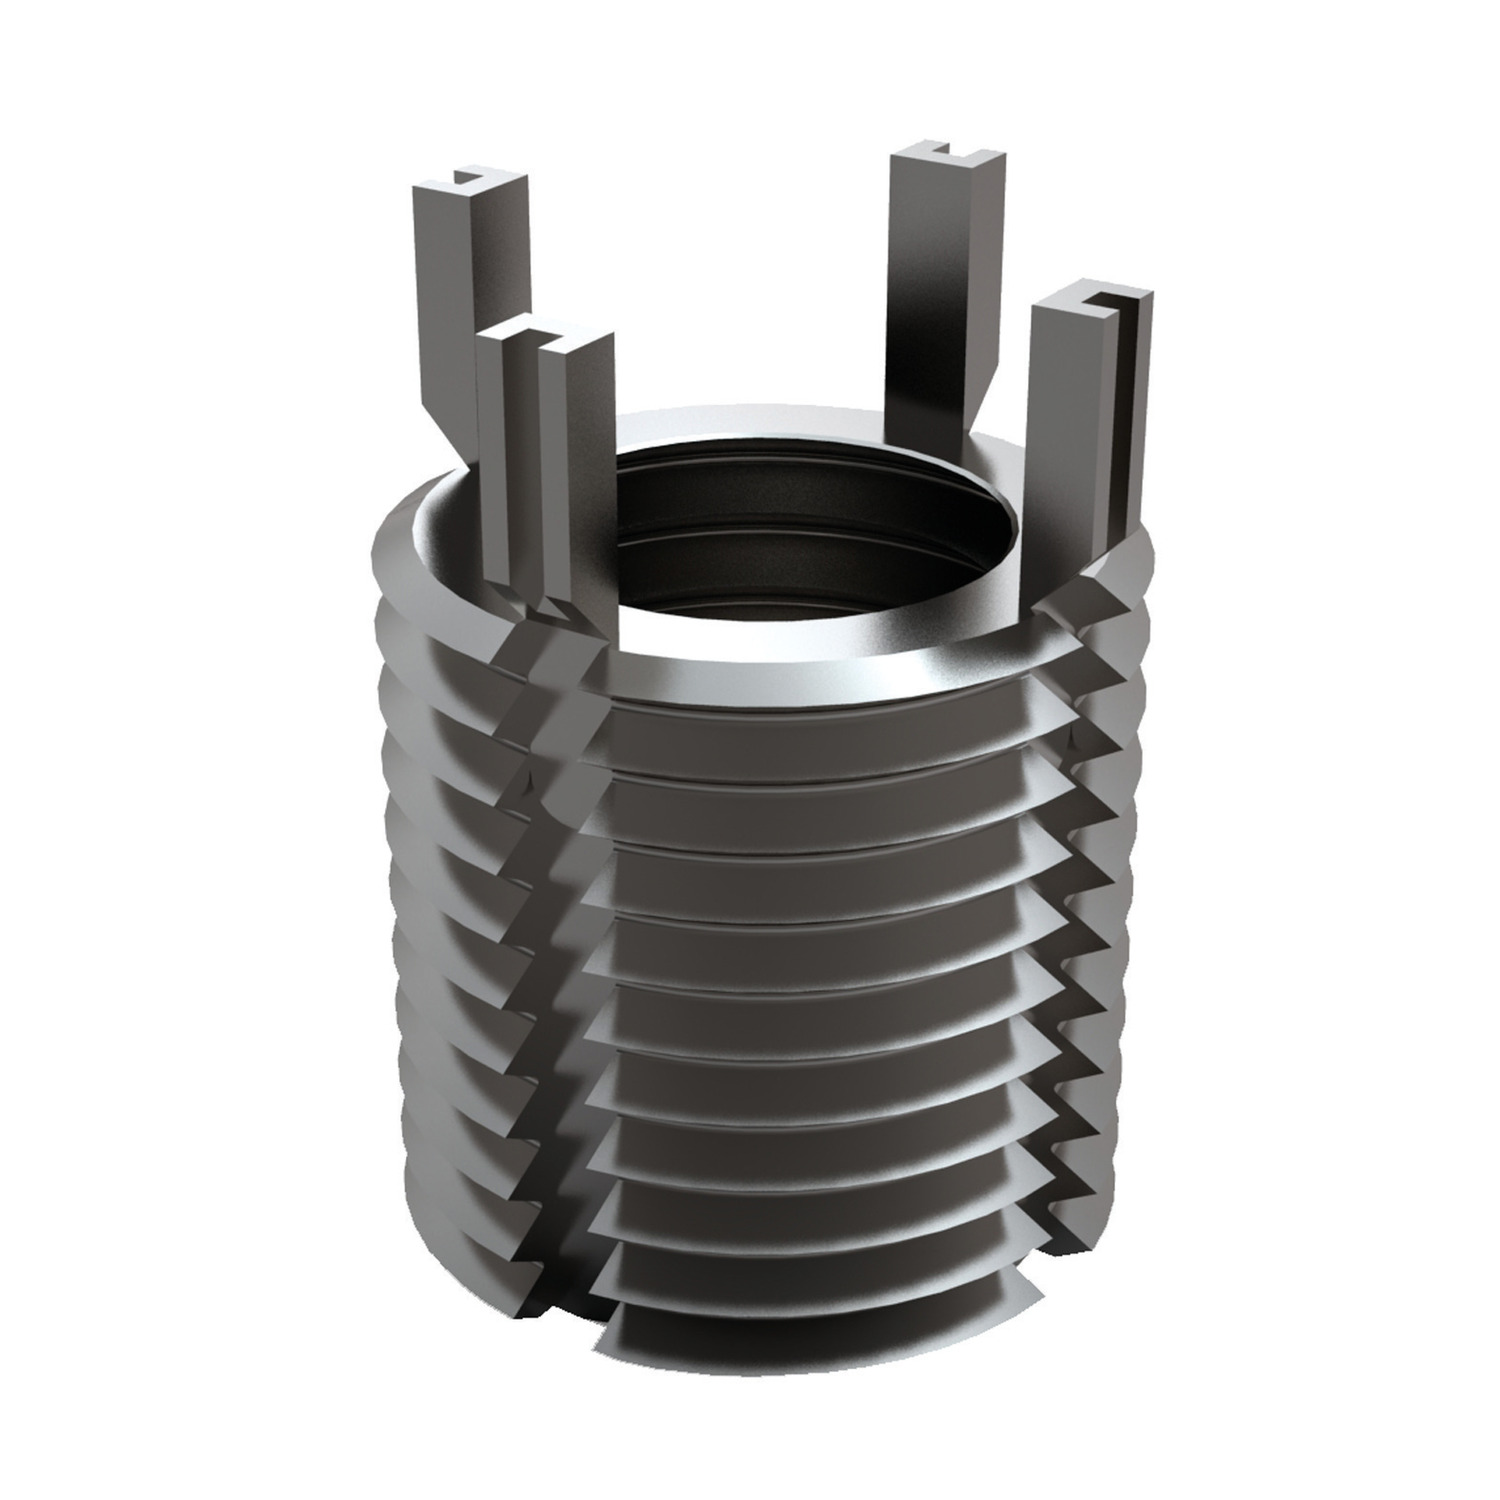 Threaded Insert - Inch Imperial, carbon steel threaded inserts for heavy duty applications. Wide range of sizes available.